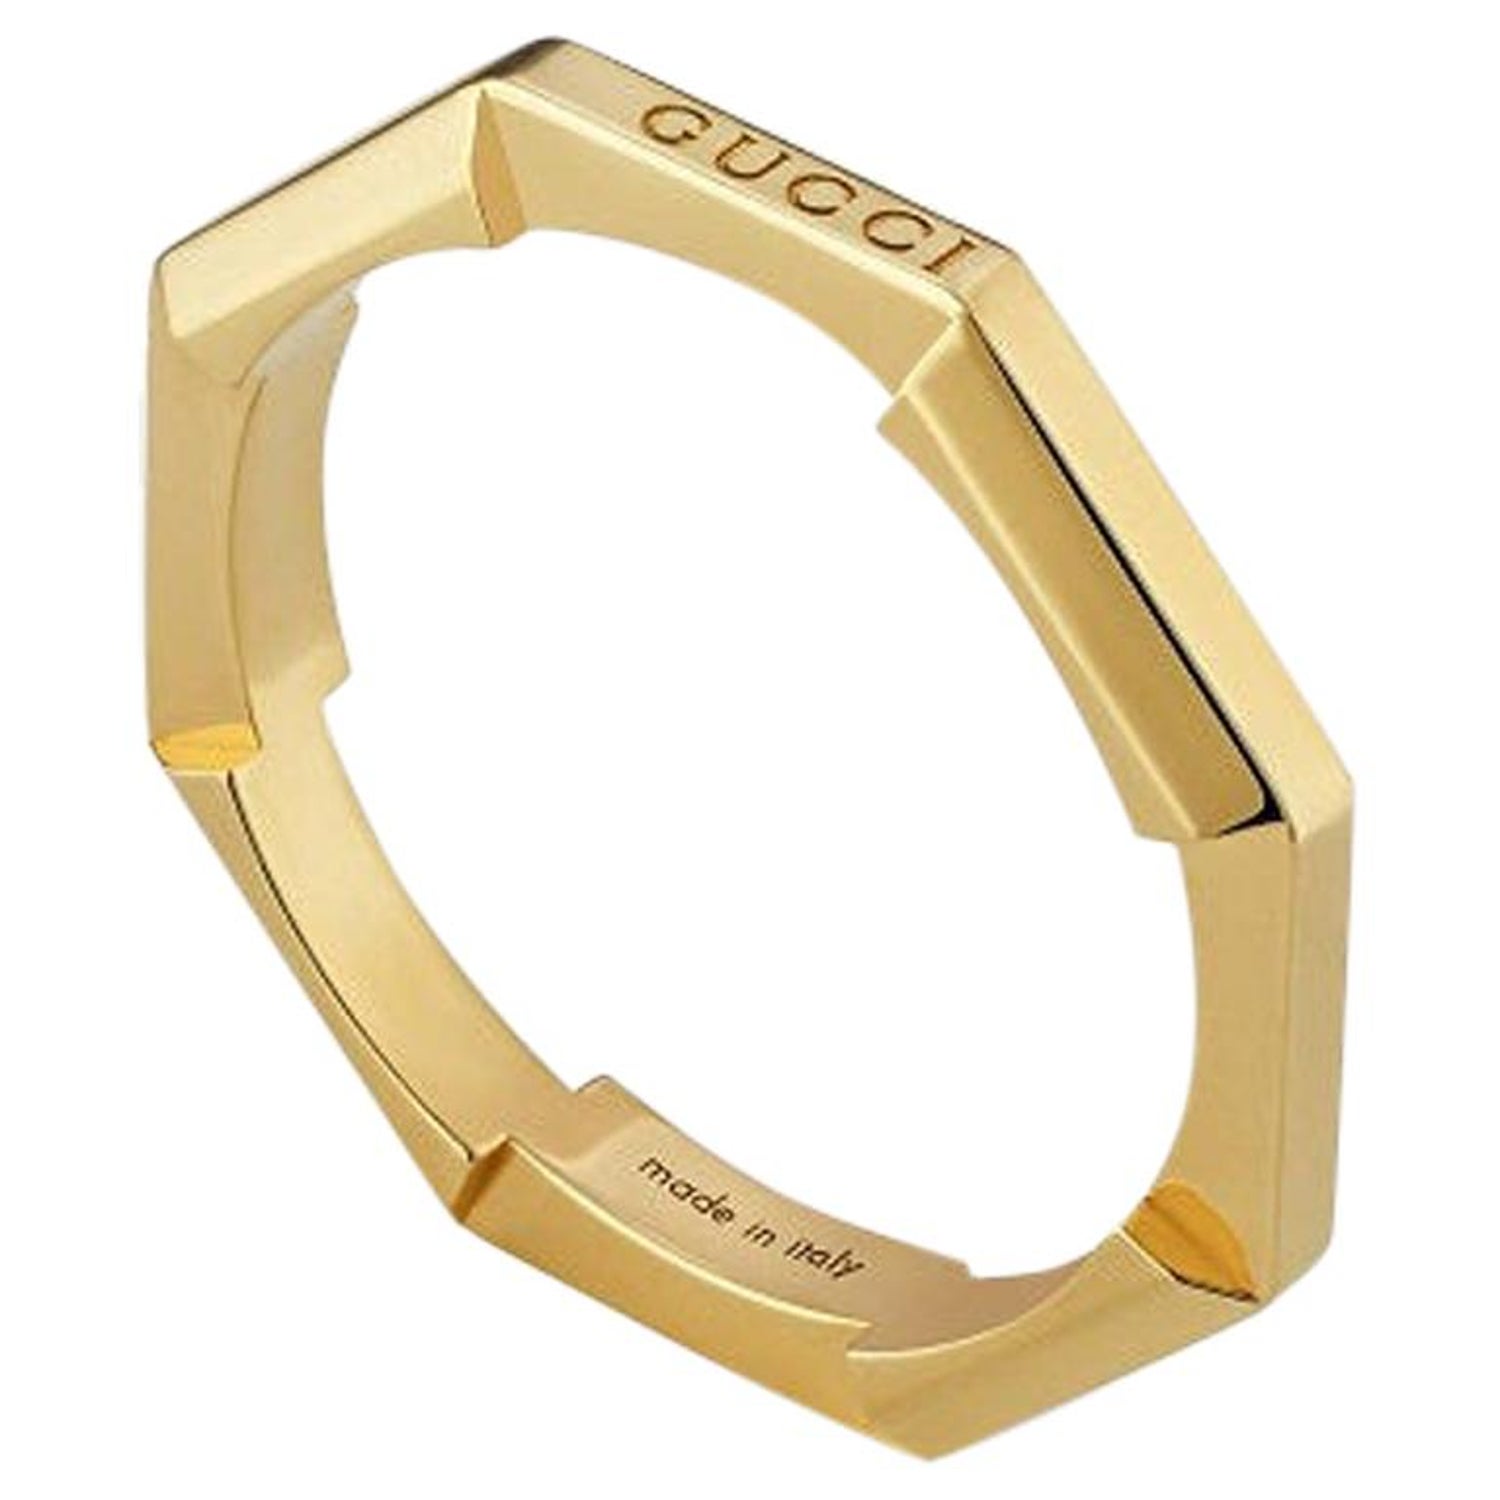 Gucci Icon Heart White Gold Ring, Size 7.25